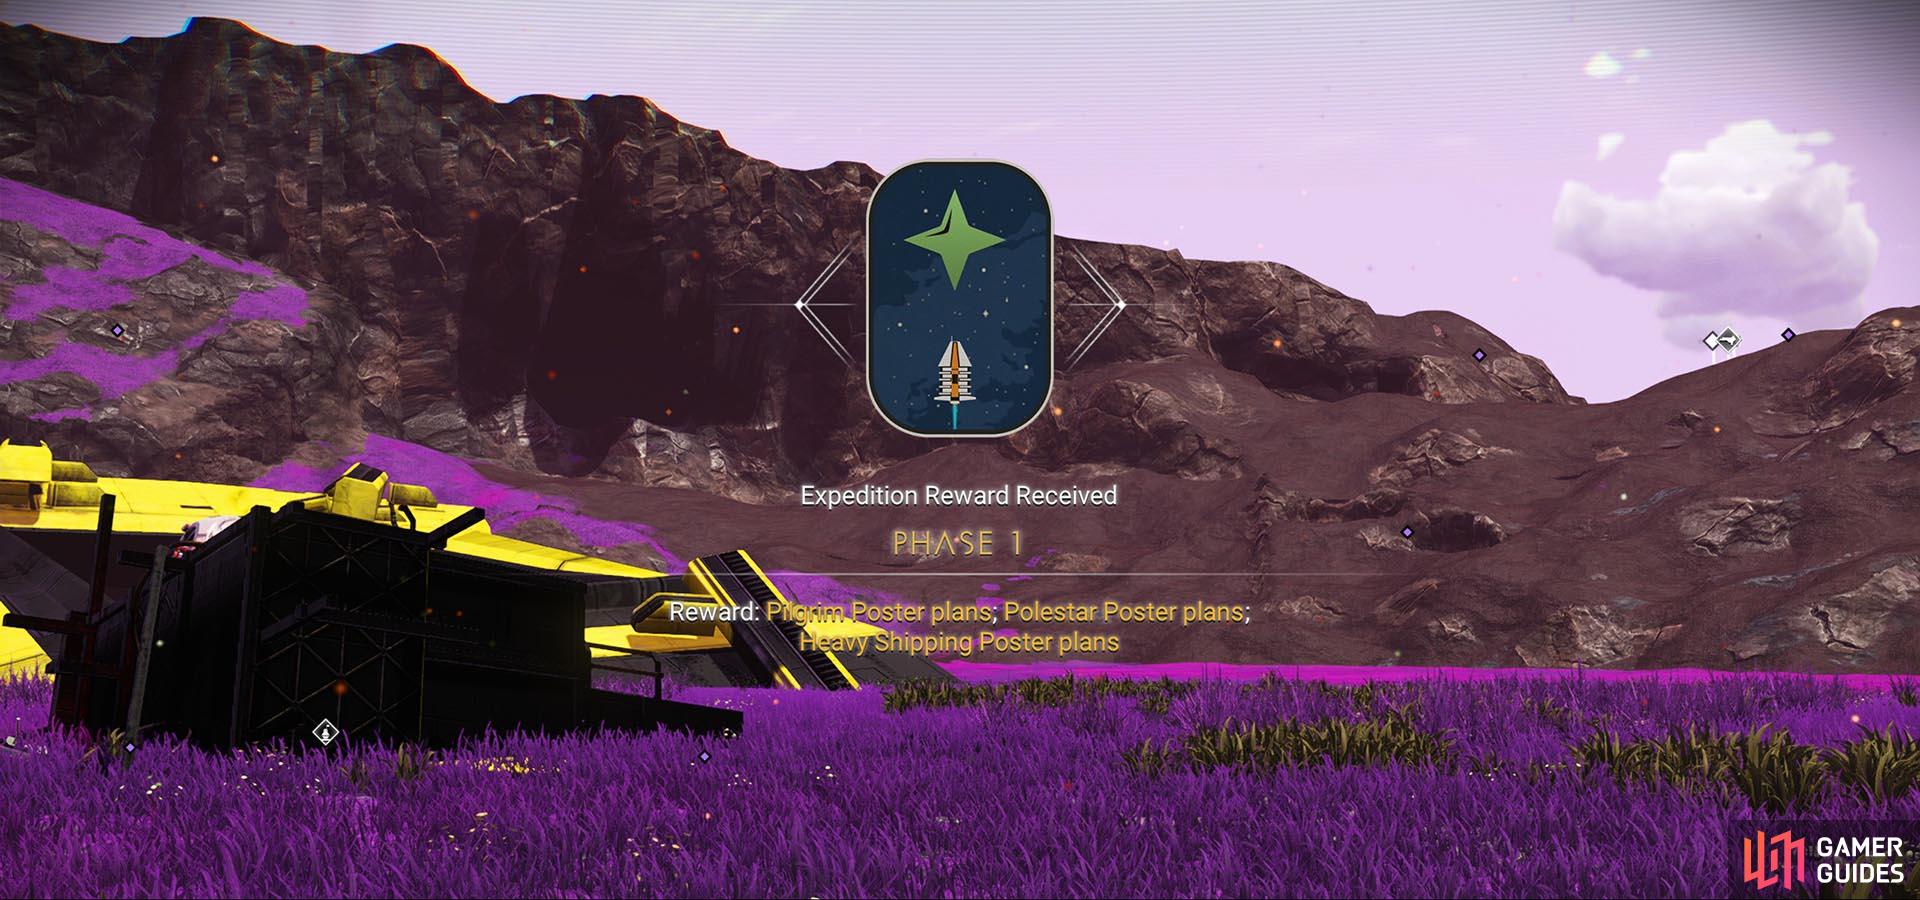 Unlocked rewards in the expedition can be used in any of NMS's modes.